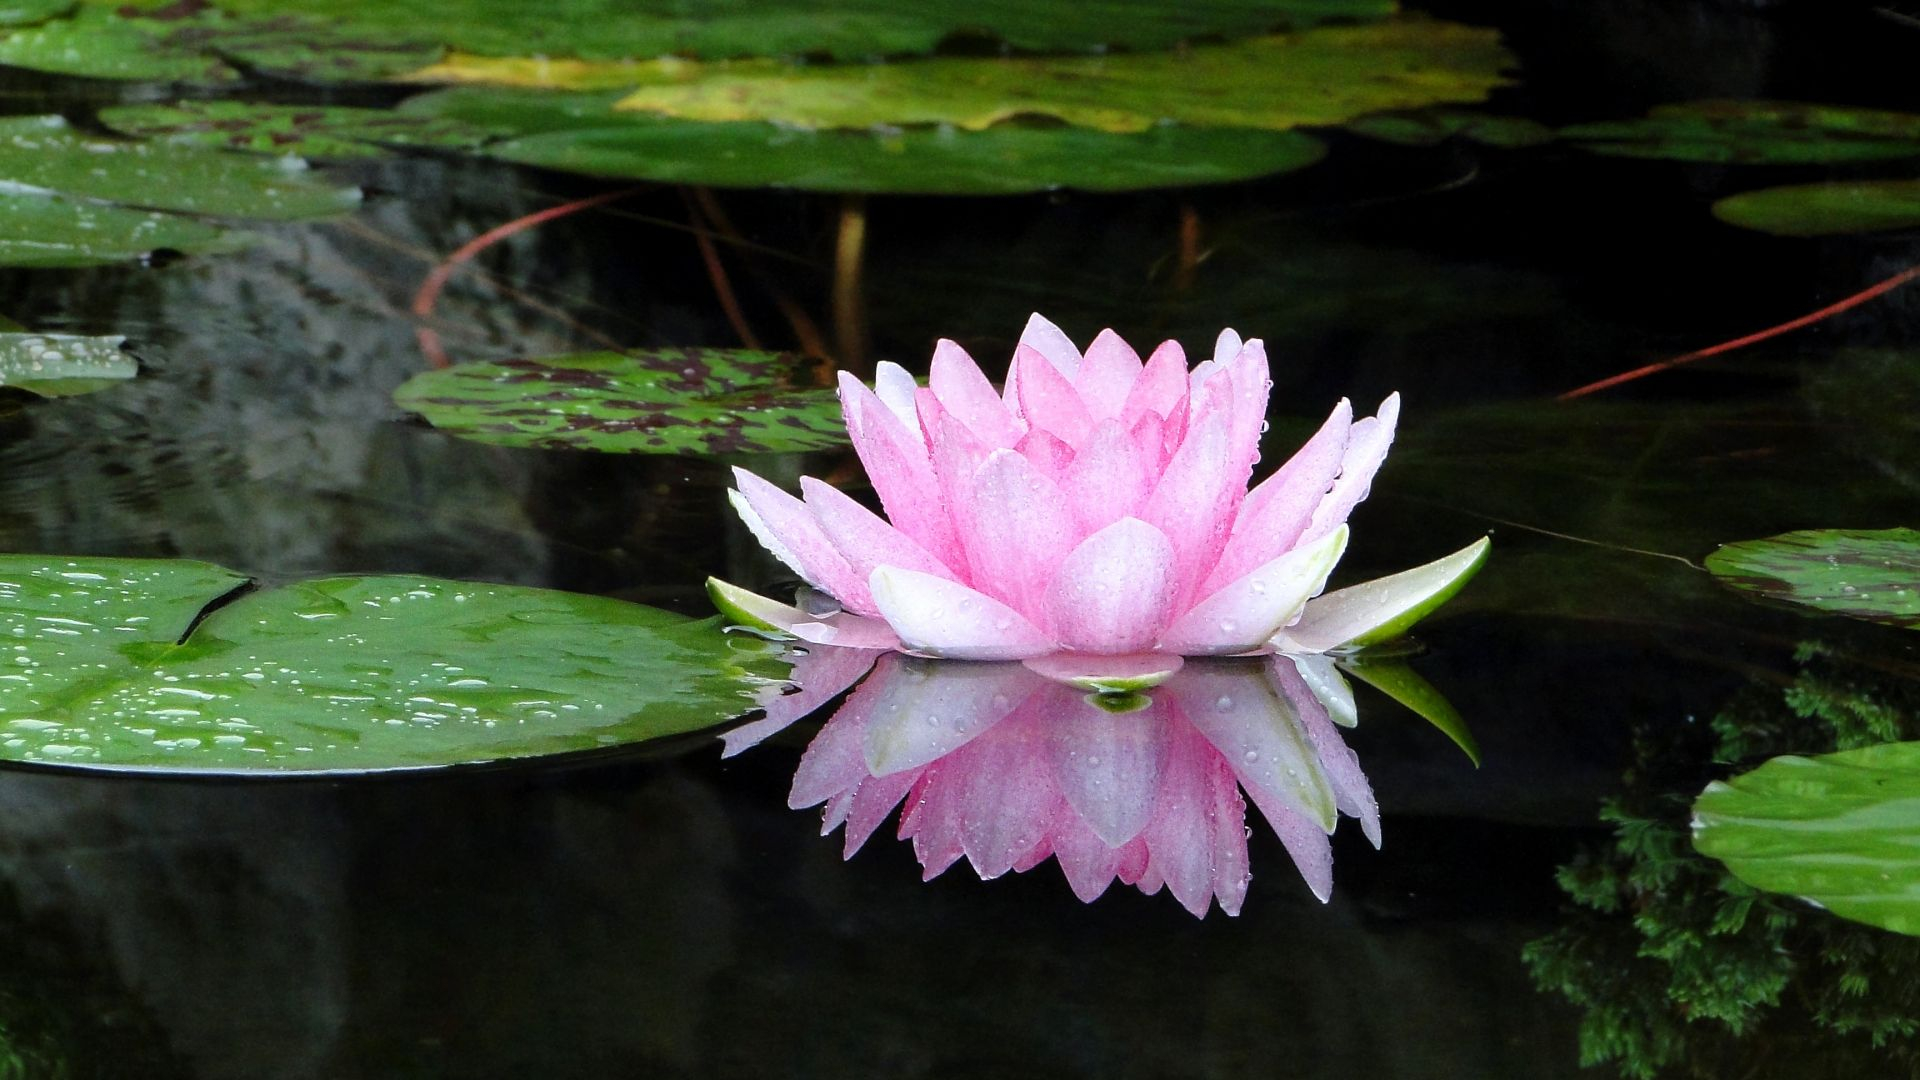 1920x1080 Desktop Wallpaper Pond, Water Lily, Flower, Reflections, Hd Image, Picture, Background, 6be7d8